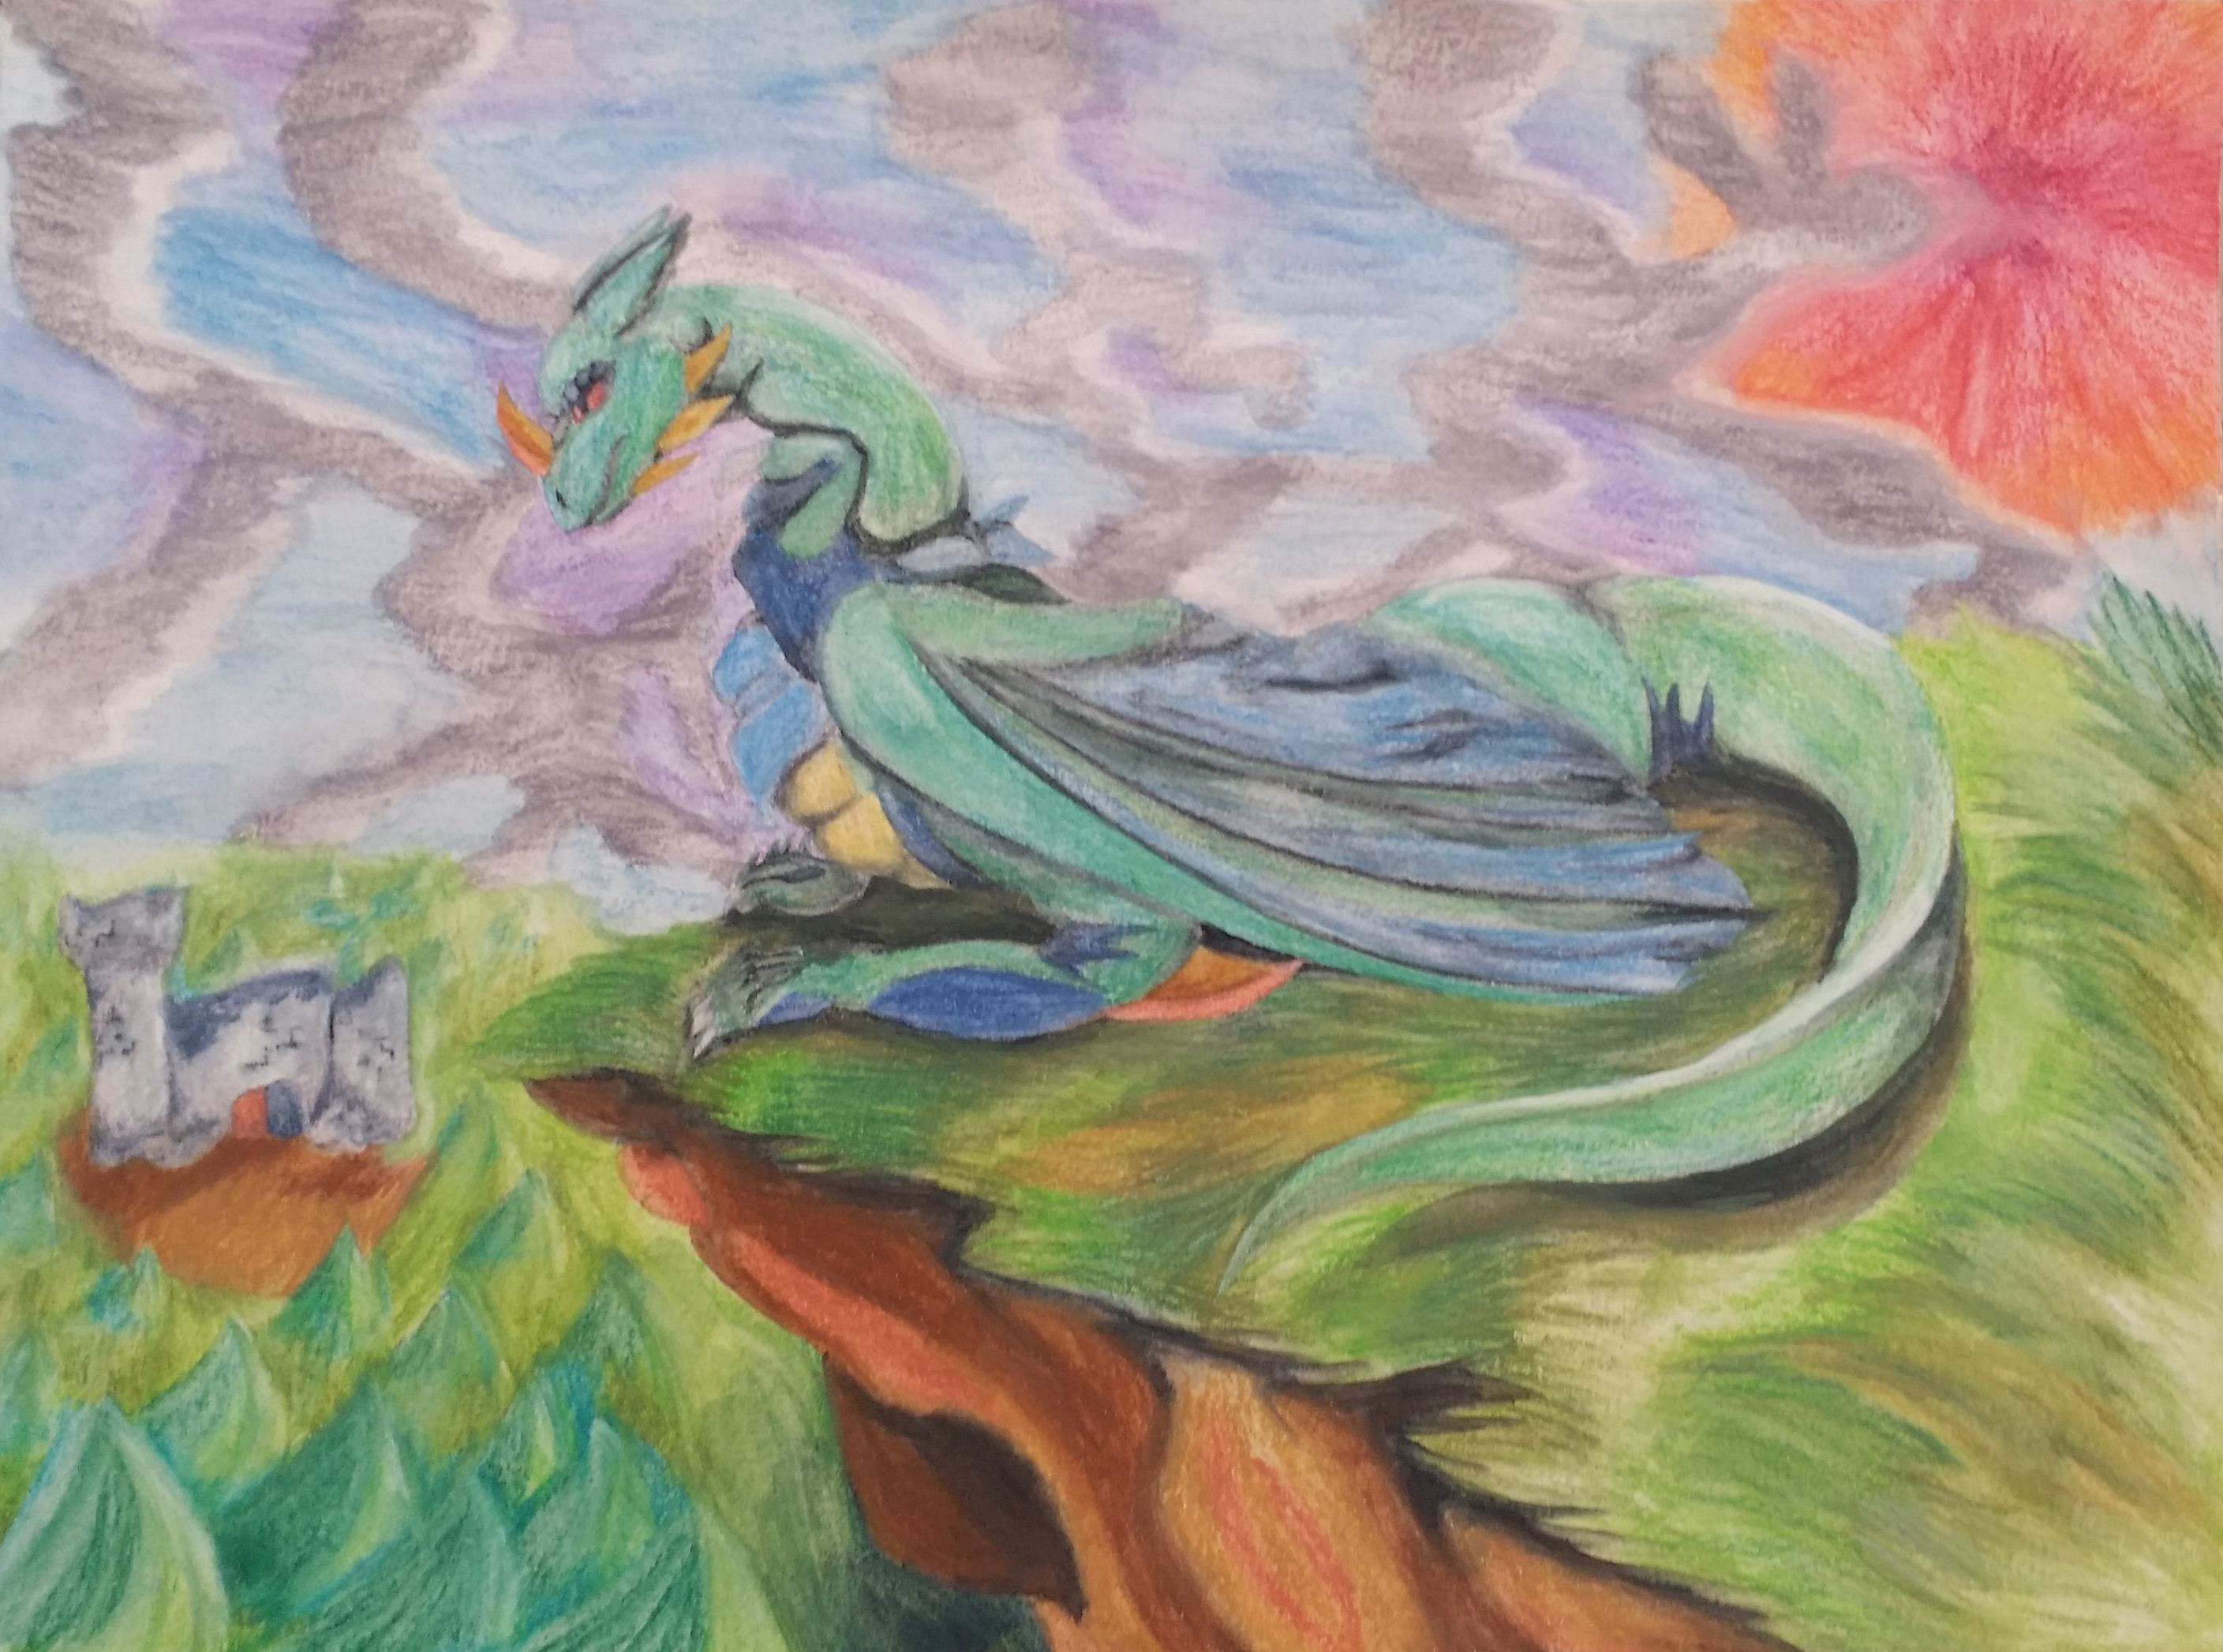 A dragon character of mine looking over a ruined tower. If the cliffside looks familiar, there is a good reason for it.
Also done with Watercolored Pencils.